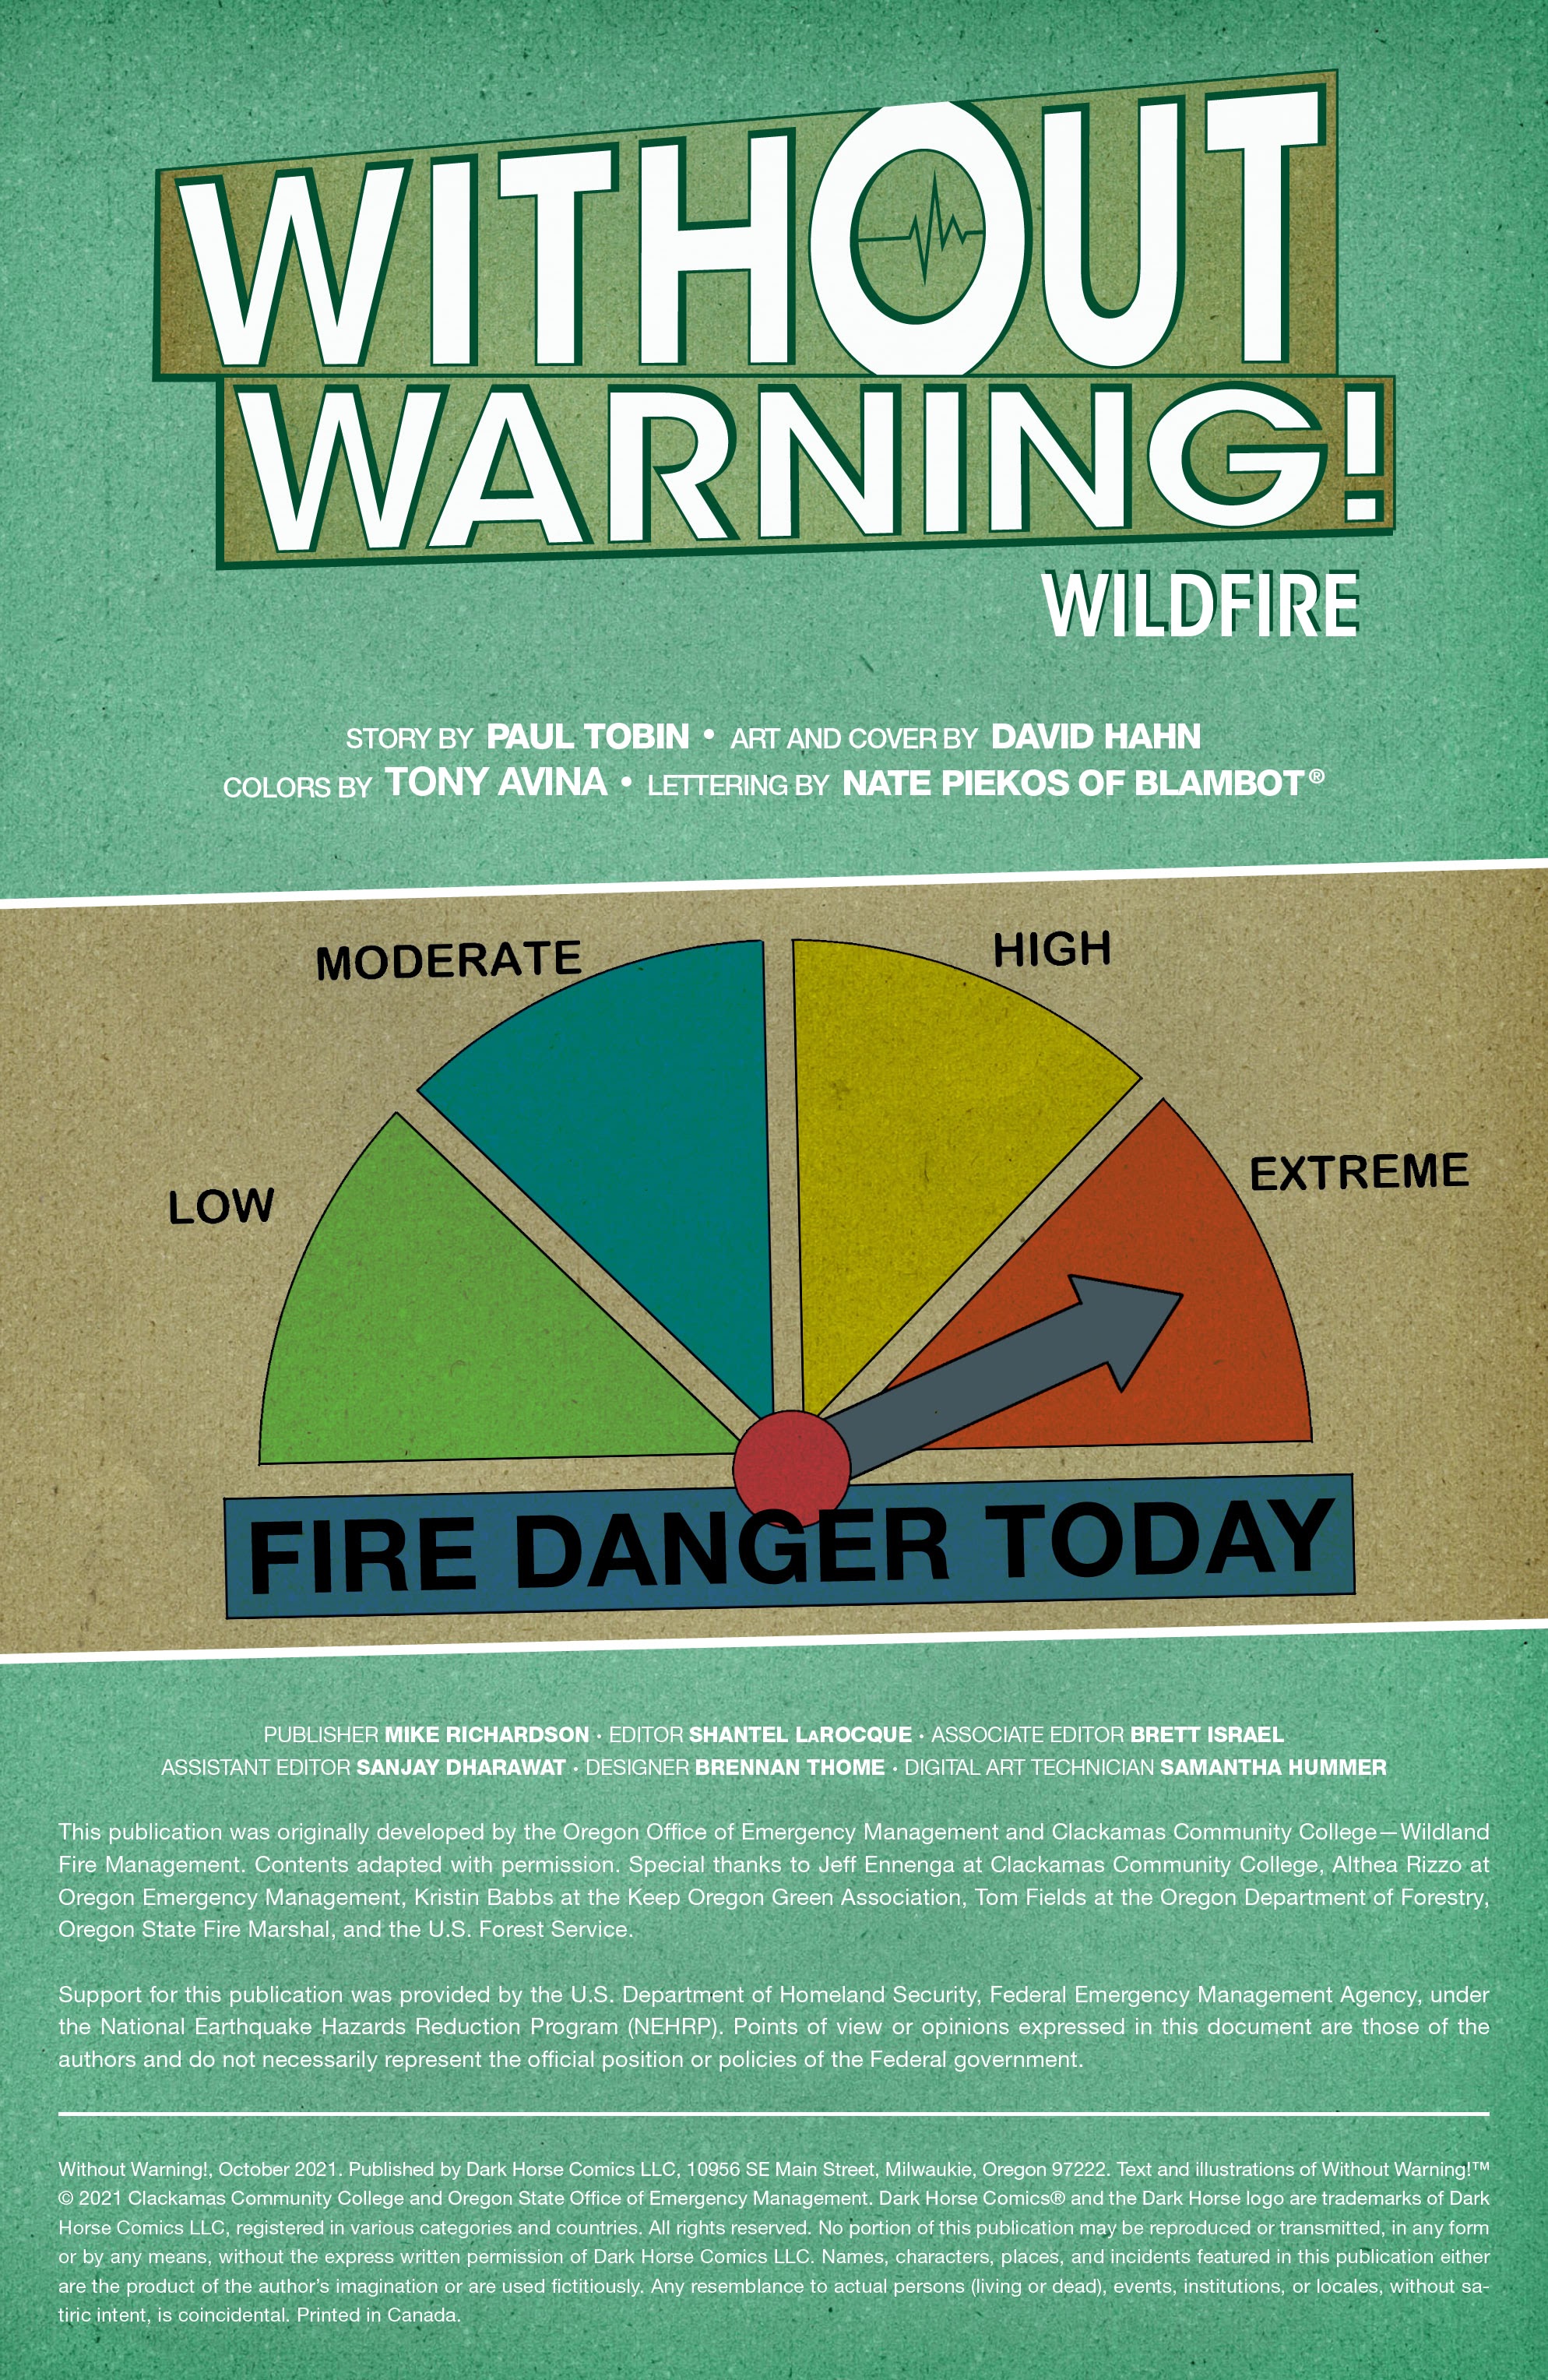 Read online Without Warning! comic -  Issue # Wildfire Safety - 2